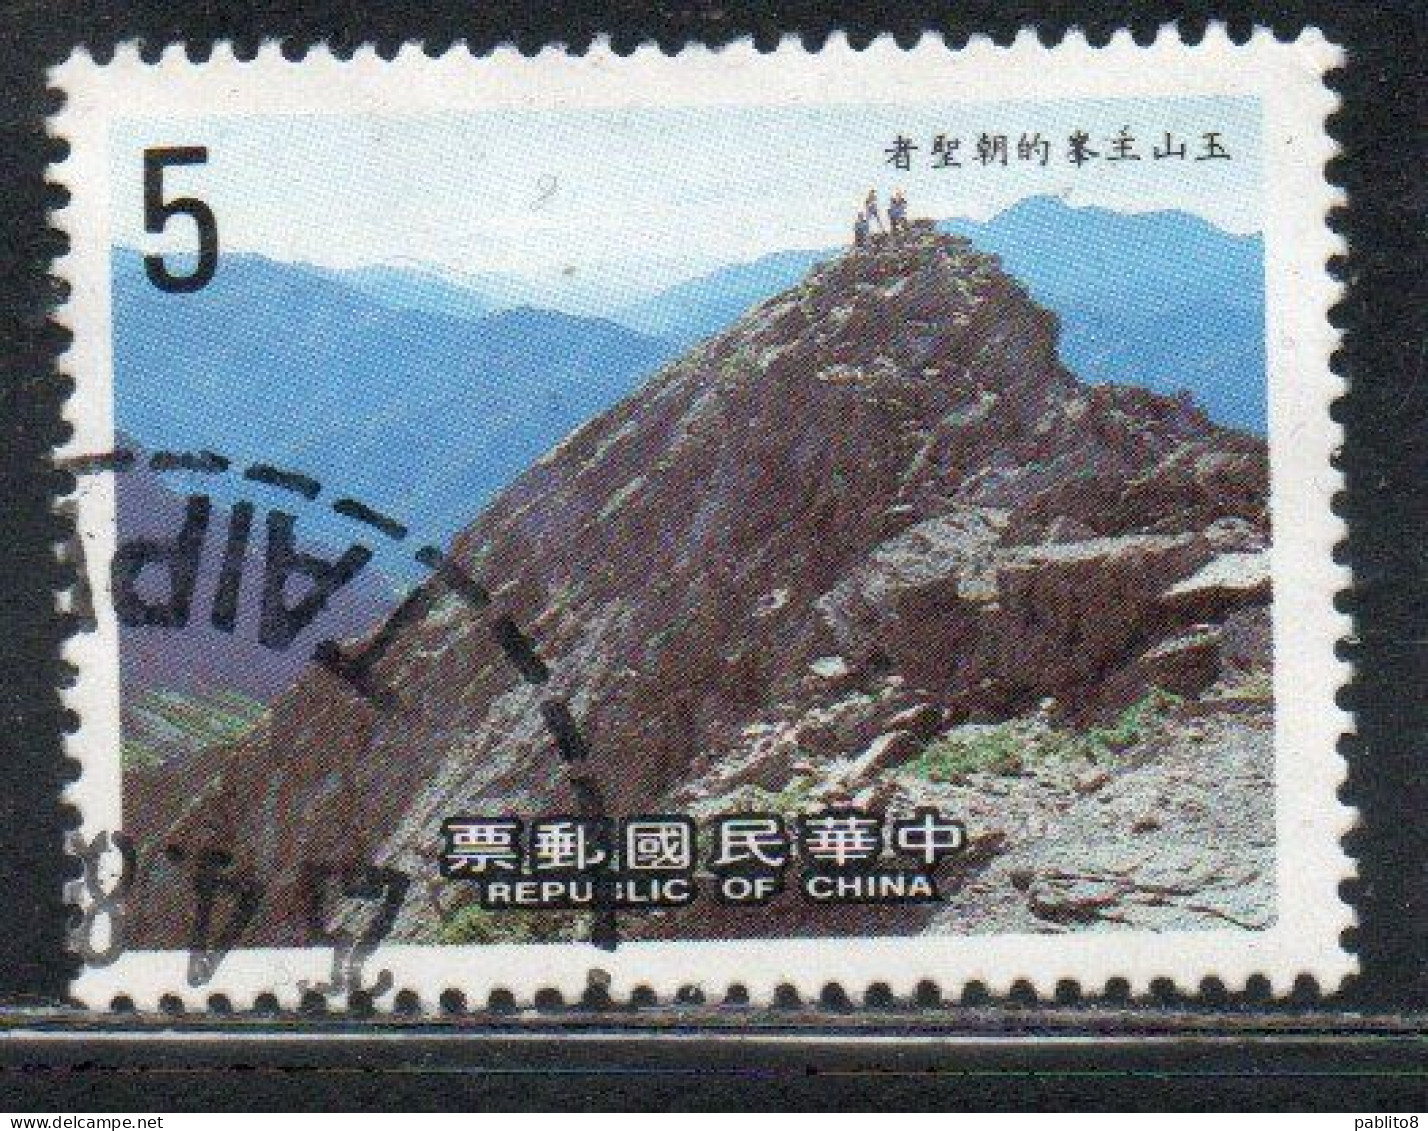 CHINA REPUBLIC CINA TAIWAN FORMOSA 1986 KENTING FIRST NATIONAL PARK SHORE ROCKS 5$ USED USATO OBLITERE' - Oblitérés